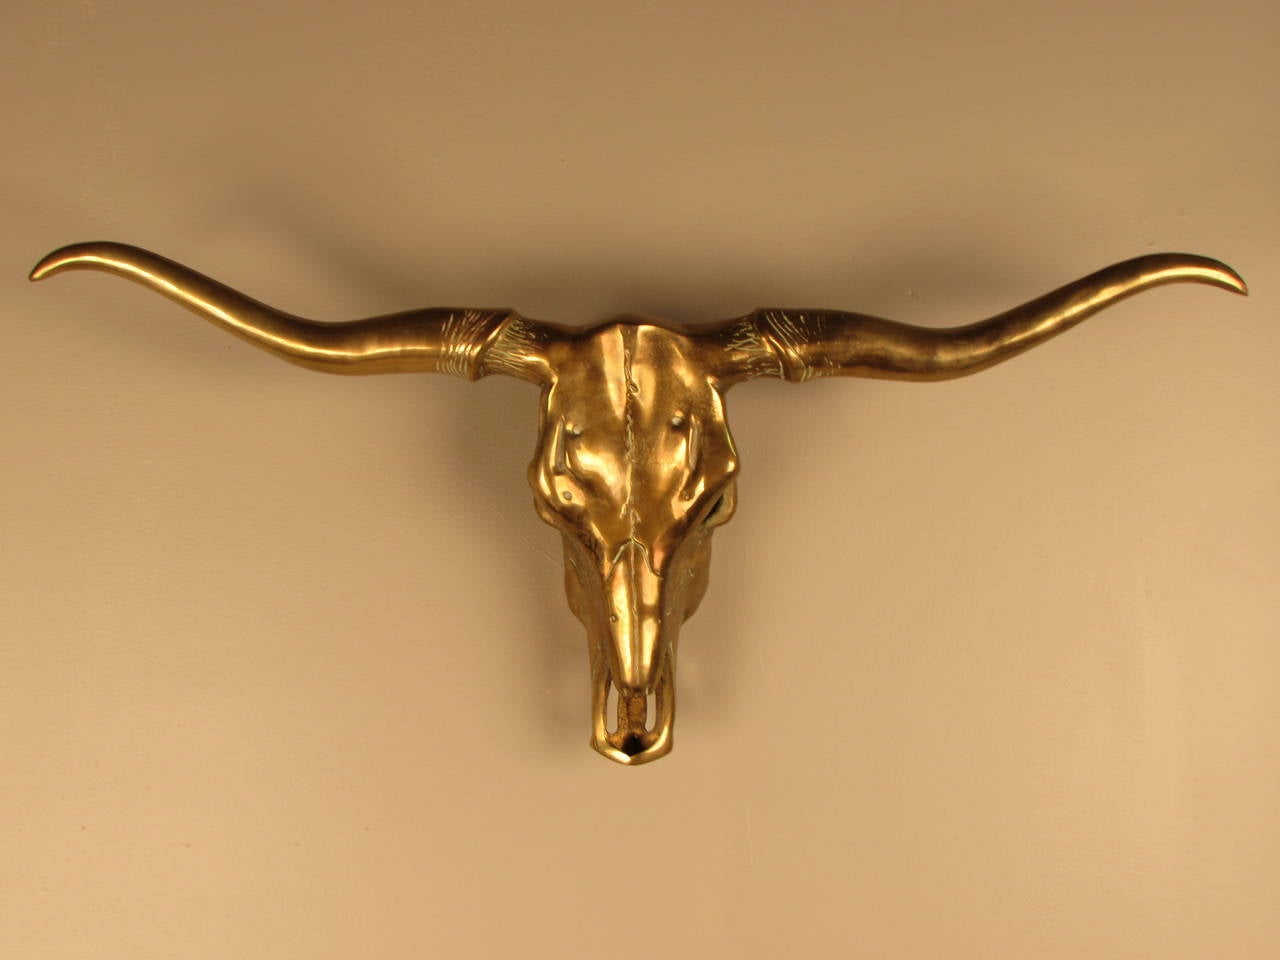 Striking cast brass longhorn steer skull and horns. Incredible decorator piece, glamorous and a bit wicked! Gorgeous golden patina. Substantial scale and weight. Size is that of a lifesize calf.